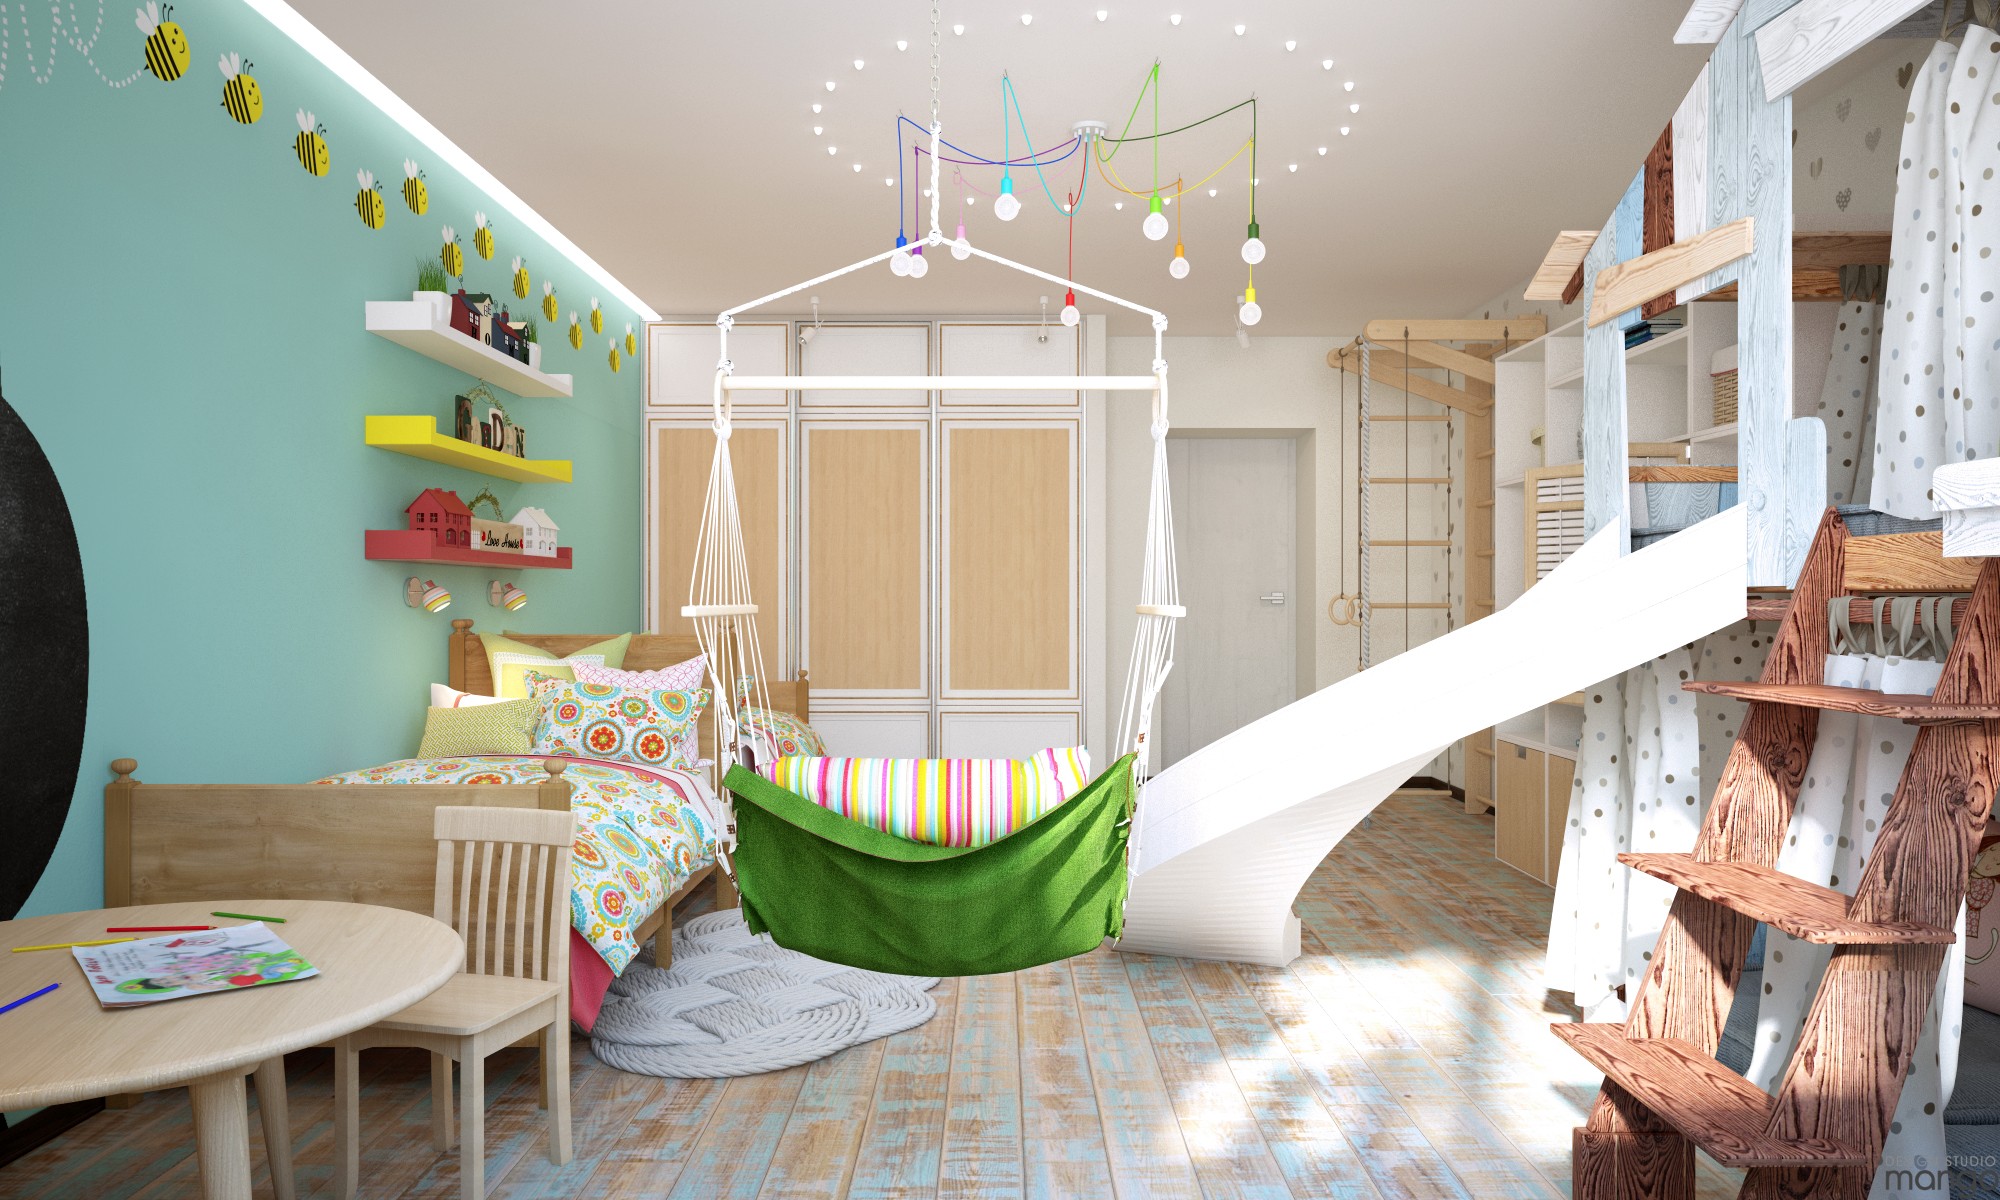 adorable nursery decor "width =" 2000 "height =" 1200 "srcset =" https://mileray.com/wp-content/uploads/2020/05/1588508400_357_Tips-How-To-Arrange-Kids-Room-Decor-With-Variety-of.jpg 2000w, https: // myfashionos. com / wp-content / uploads / 2016/11 / Design-Studio-Mango11-300x180.jpg 300w, https://mileray.com/wp-content/uploads/2016/11/Design-Studio-Mango11-768x461. jpg 768w, https://mileray.com/wp-content/uploads/2016/11/Design-Studio-Mango11-1024x614.jpg 1024w, https://mileray.com/wp-content/uploads/2016/11/ Design-Studio-Mango11-696x418.jpg 696w, https://mileray.com/wp-content/uploads/2016/11/Design-Studio-Mango11-1068x641.jpg 1068w, https://mileray.com/wp- Content / Uploads / 2016/11 / Design-Studio-Mango11-700x420.jpg 700w "sizes =" (maximum width: 2000px) 100vw, 2000px